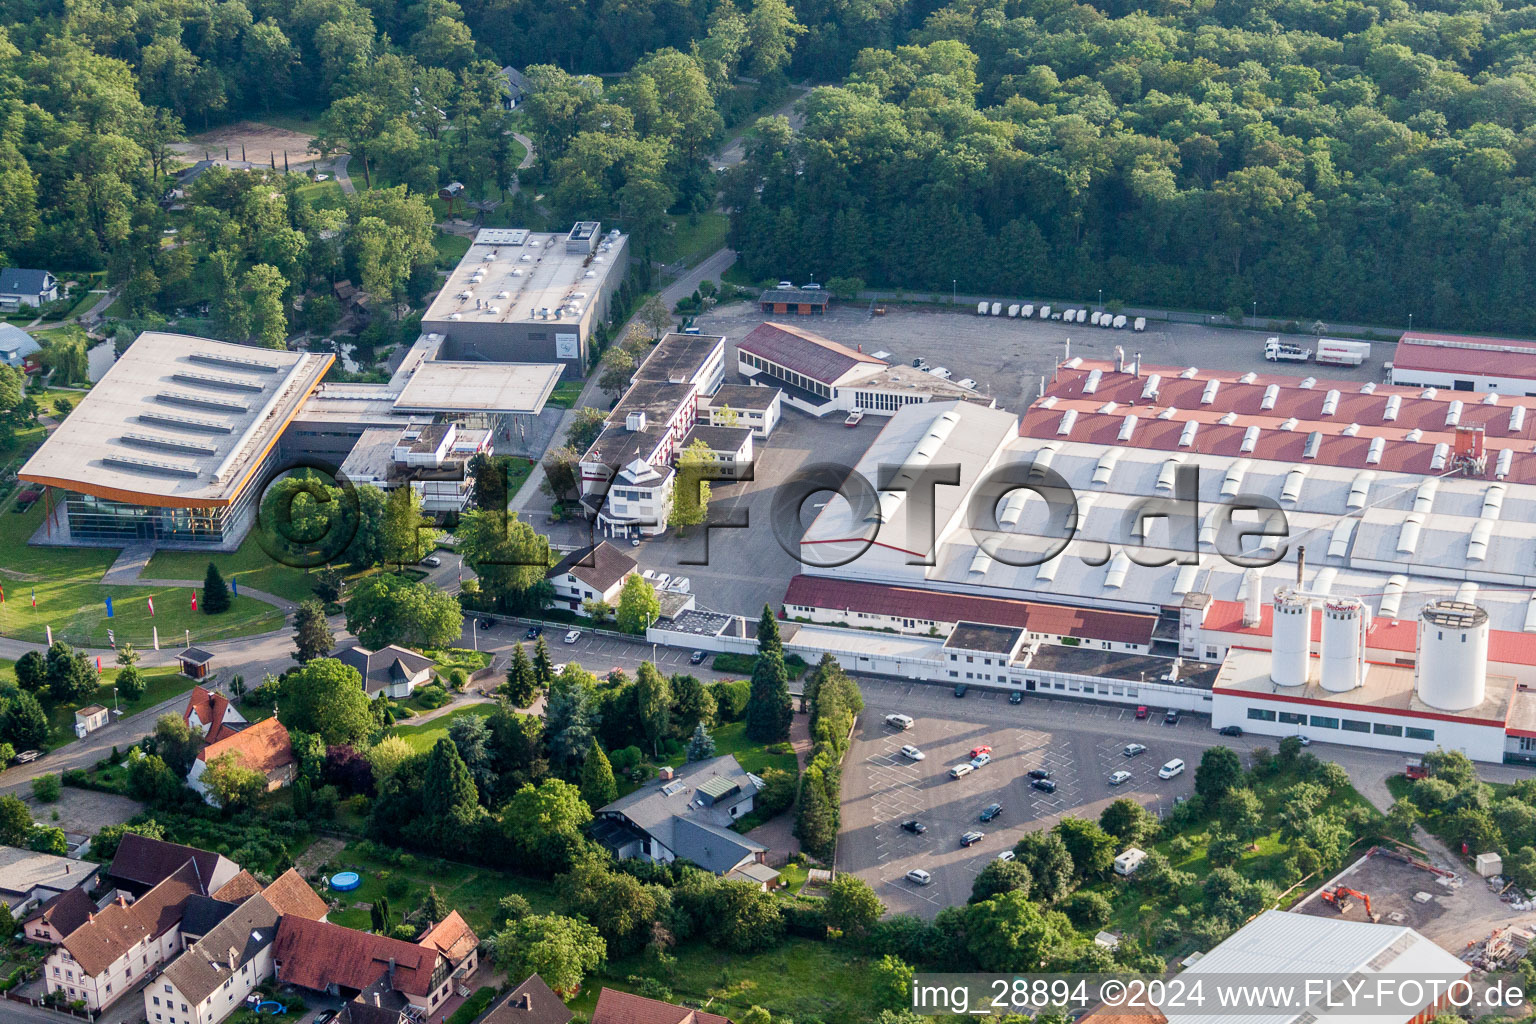 Aerial view of Building and production halls on the premises of WeberHaus GmbH & Co. KG in the district Linx in Rheinau in the state Baden-Wurttemberg, Germany